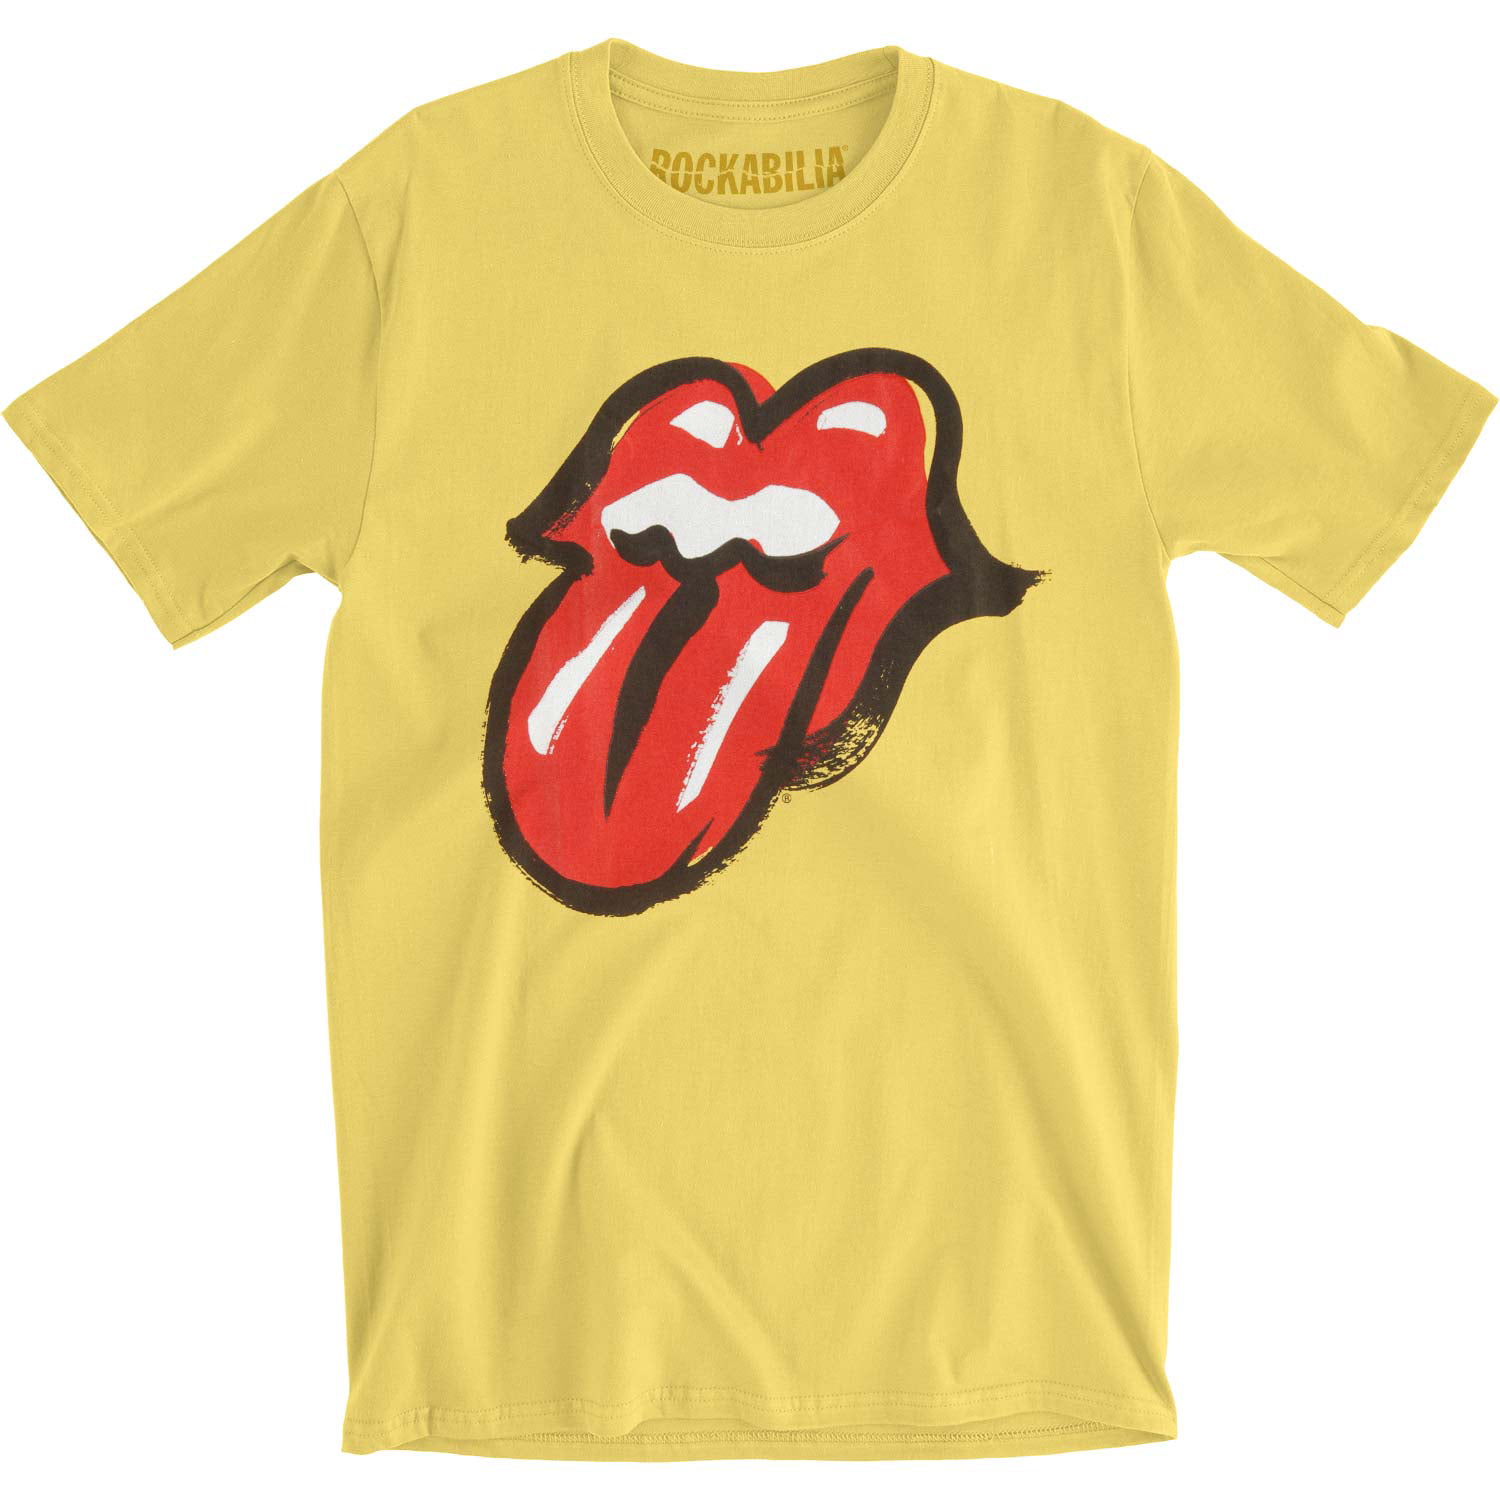 Official The Rolling Stones T Shirt band logo No Filter tongue tour Jagger mens